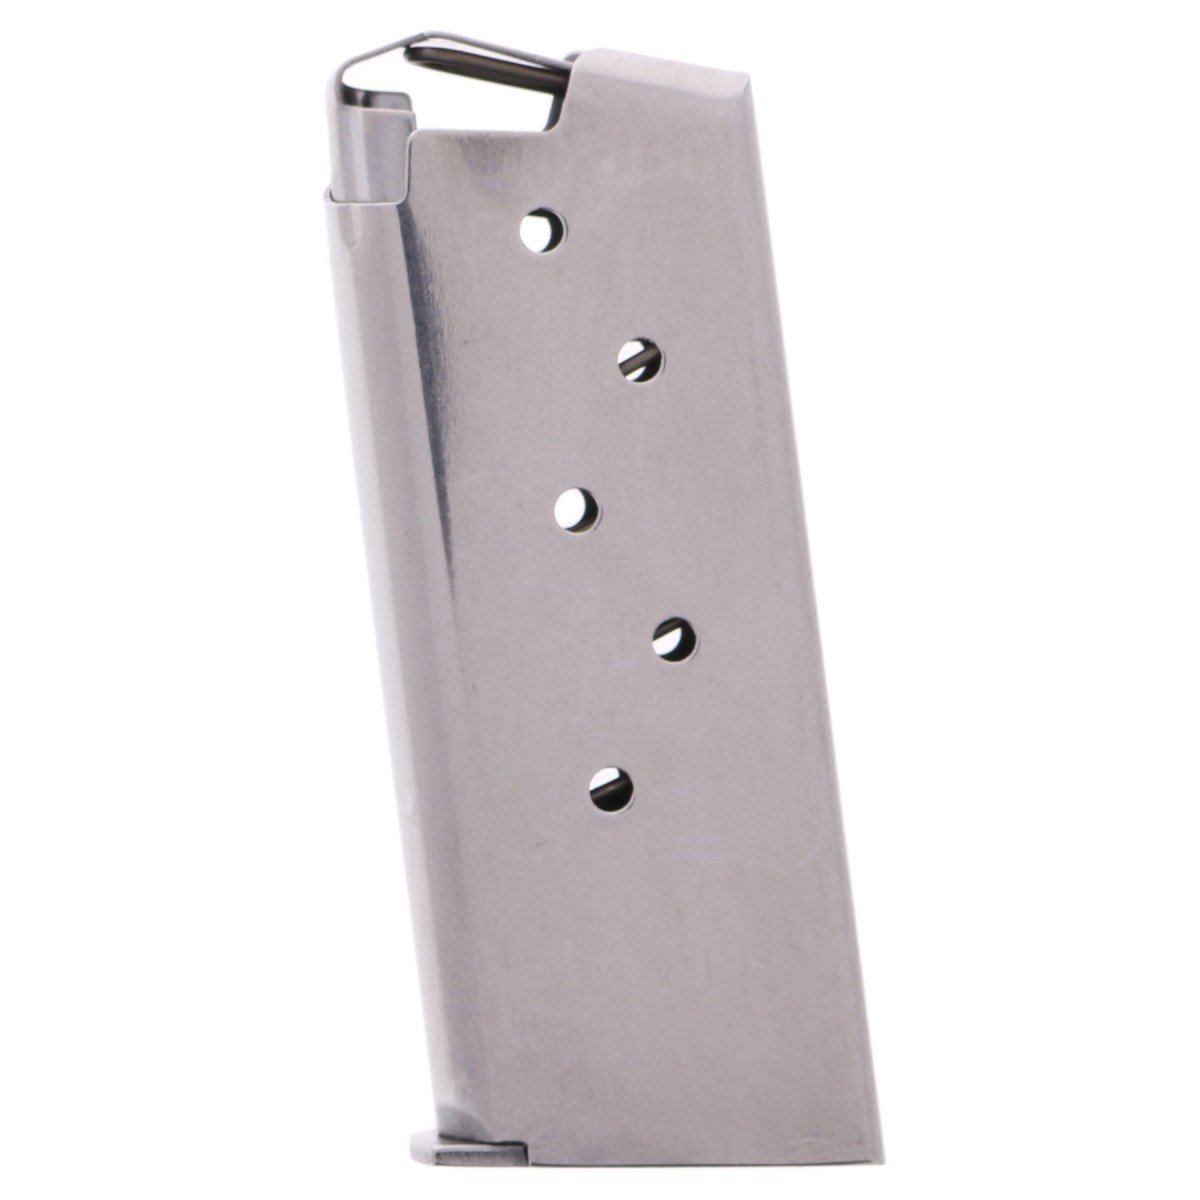 Kimber Micro 9 9mm Stainless Steel 6-round Magazine 1200497A 